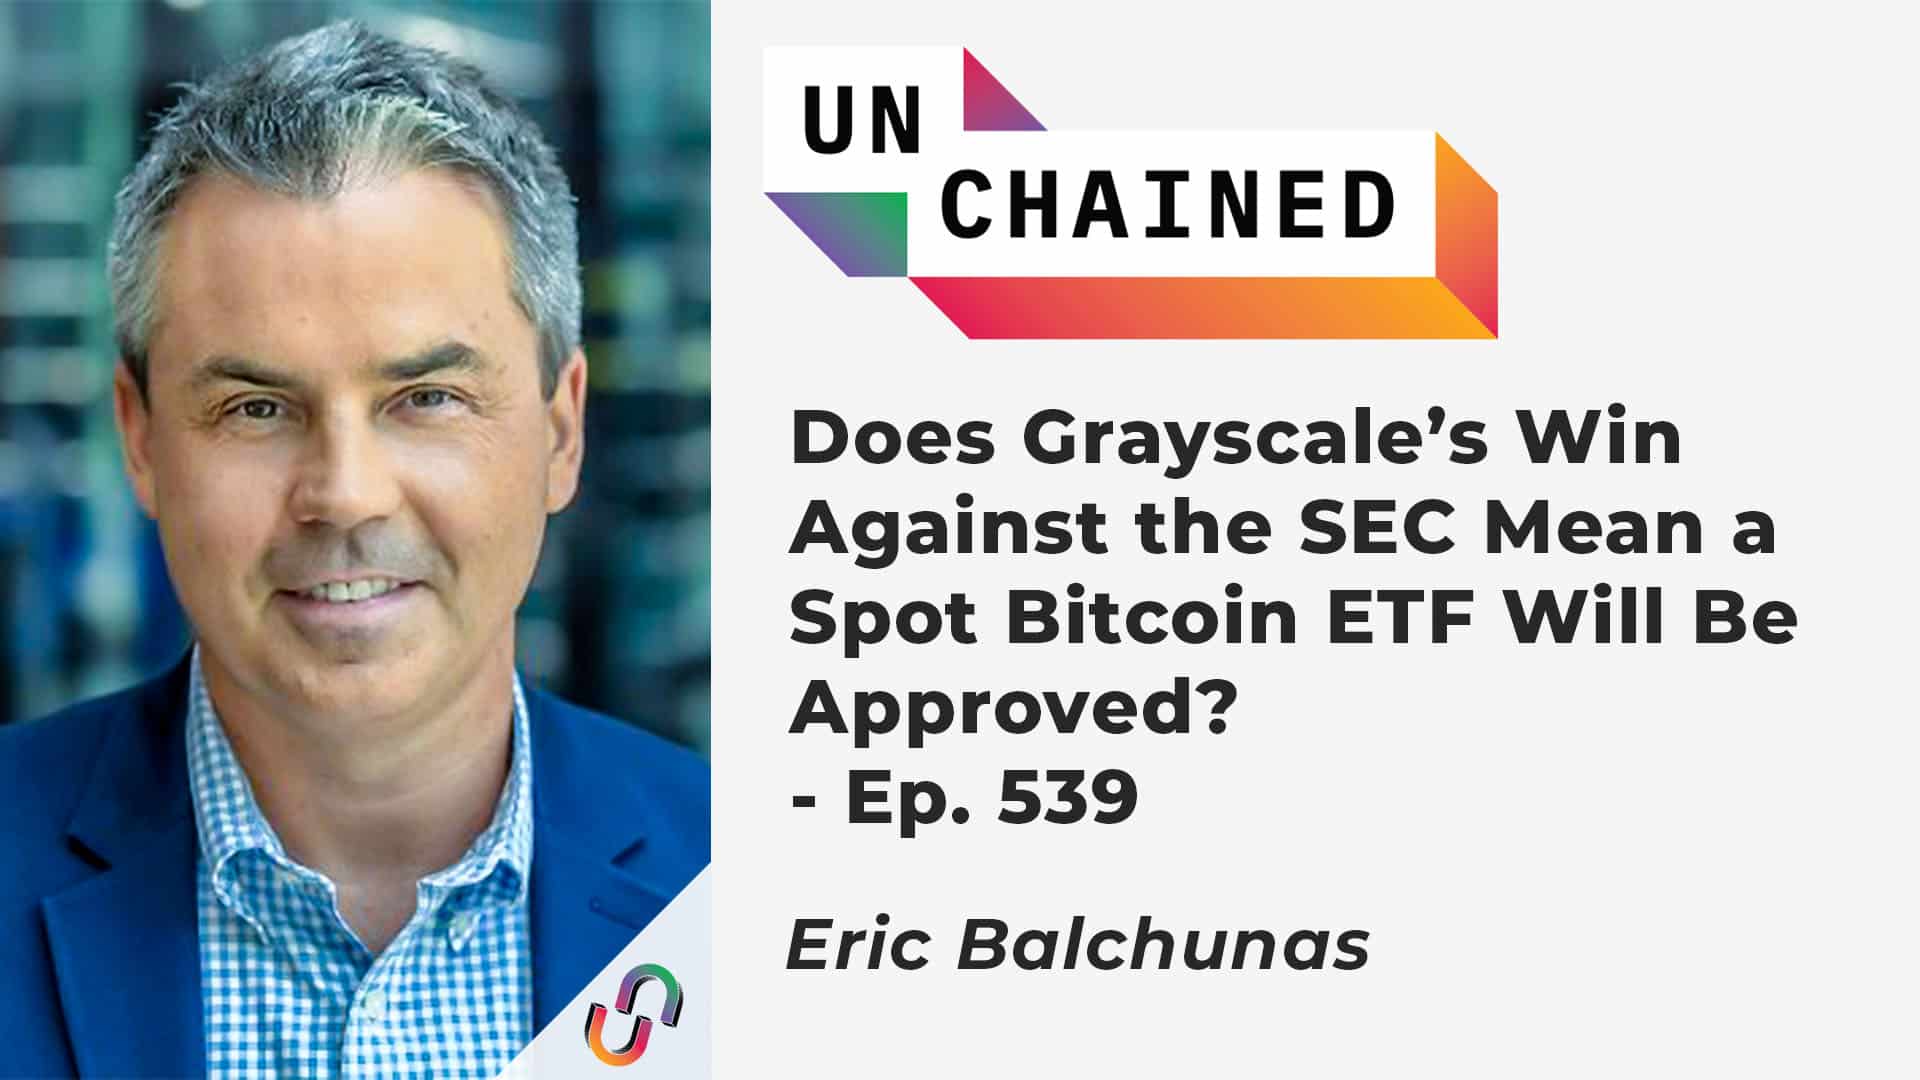 Does Grayscale’s Win Against the SEC Mean a Spot Bitcoin ETF Will Be Approved? - Ep. 539